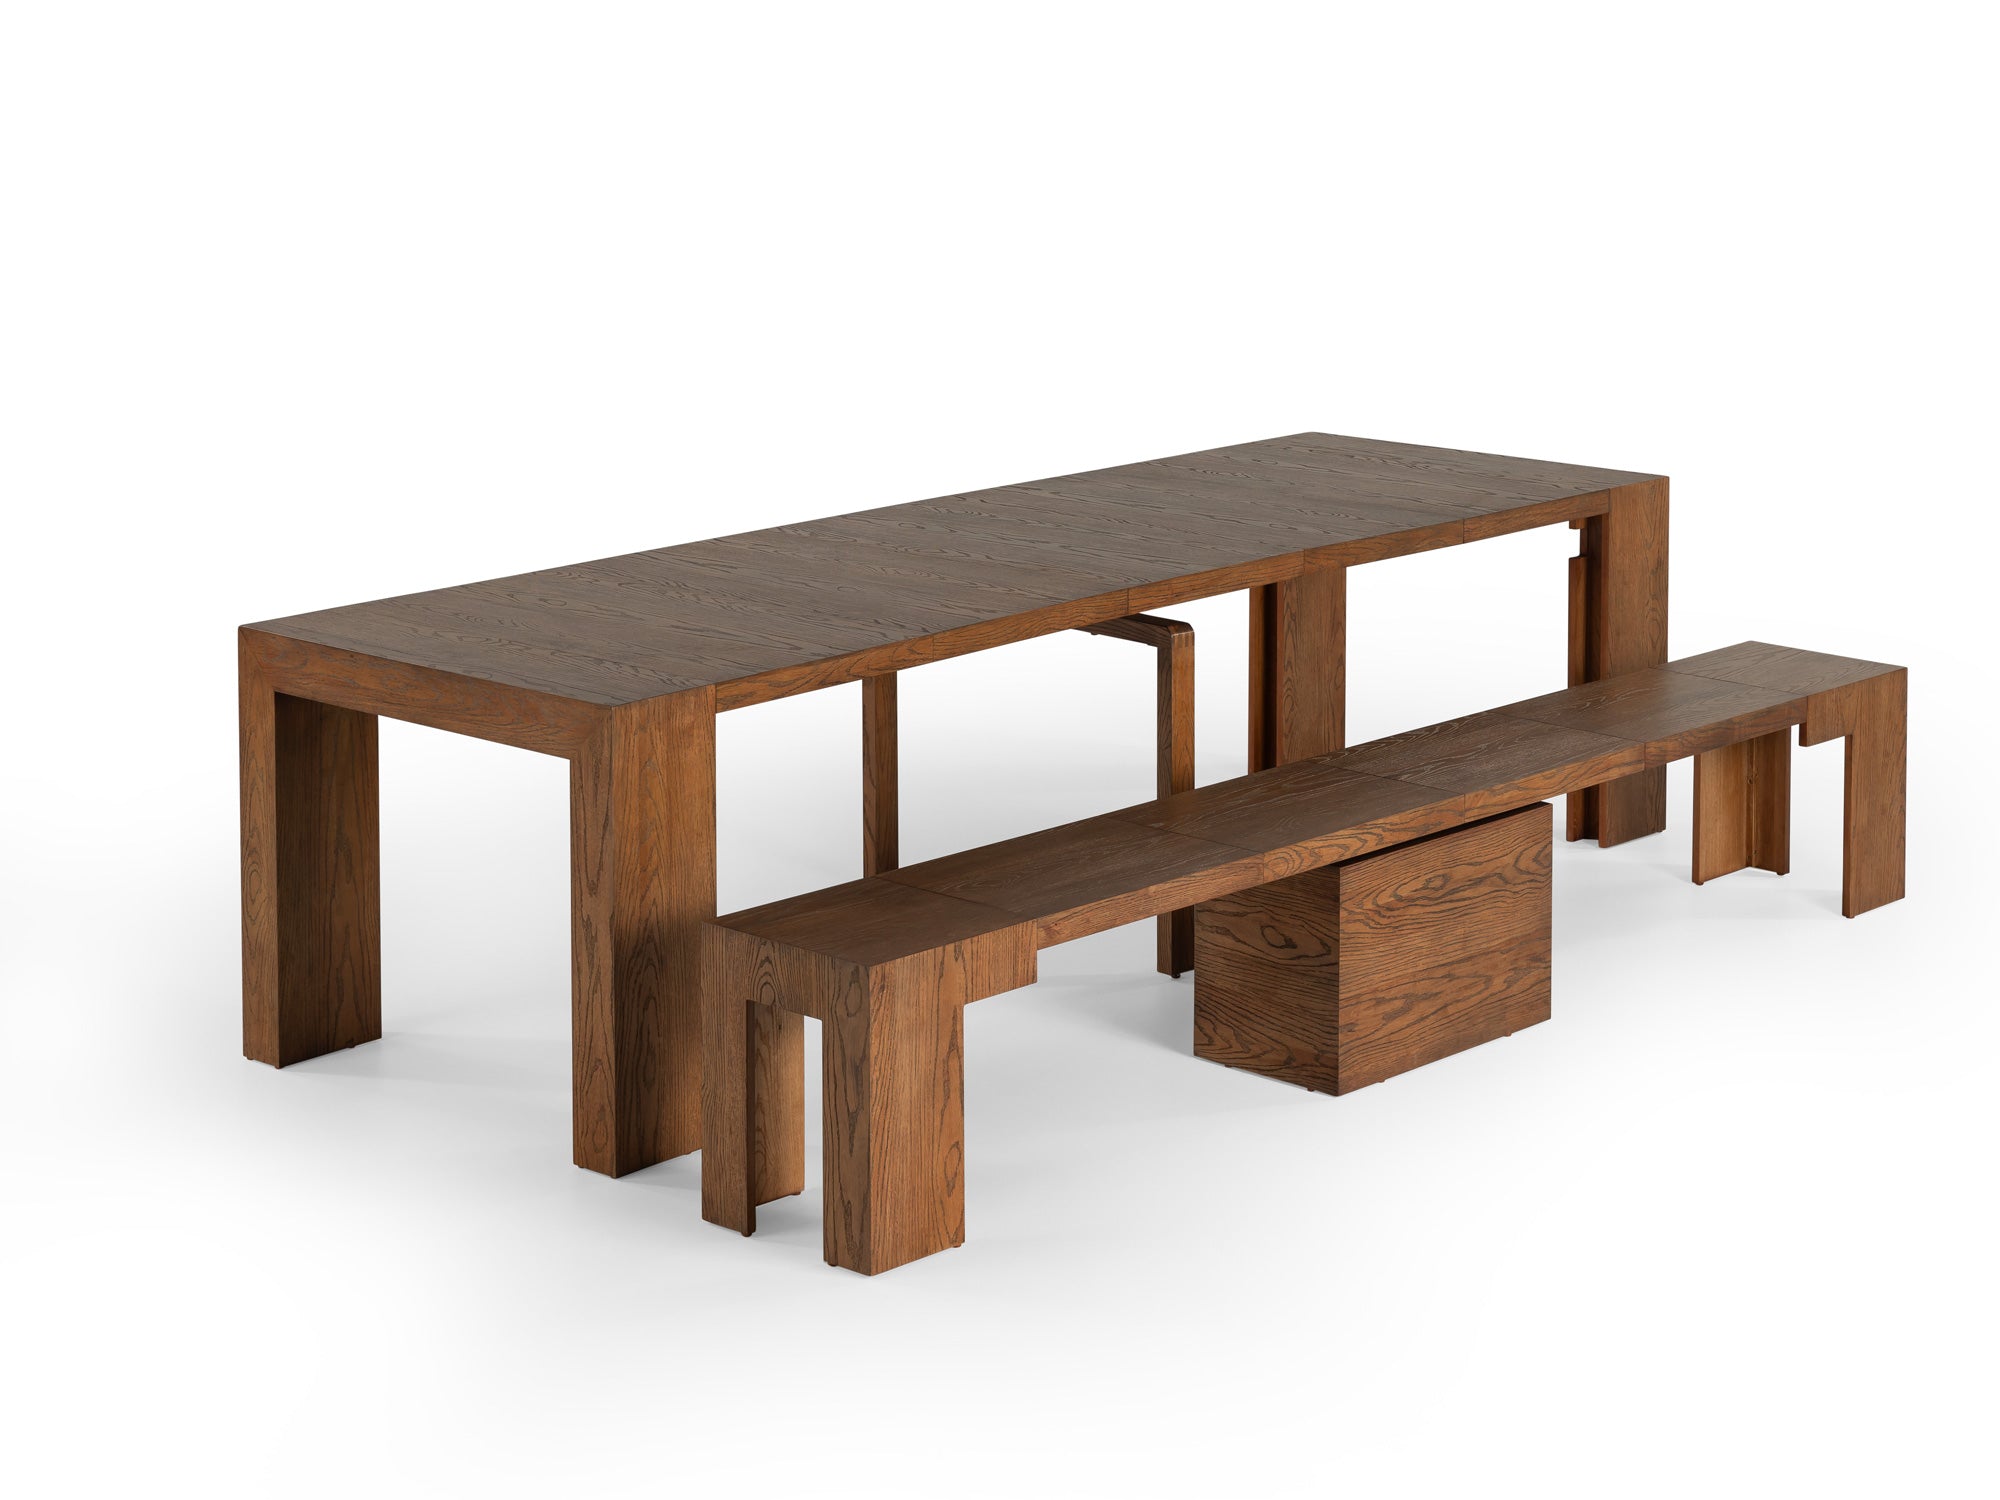 Mobili Fiver, First Fixed Table, Rustic Oak, Made in Italy